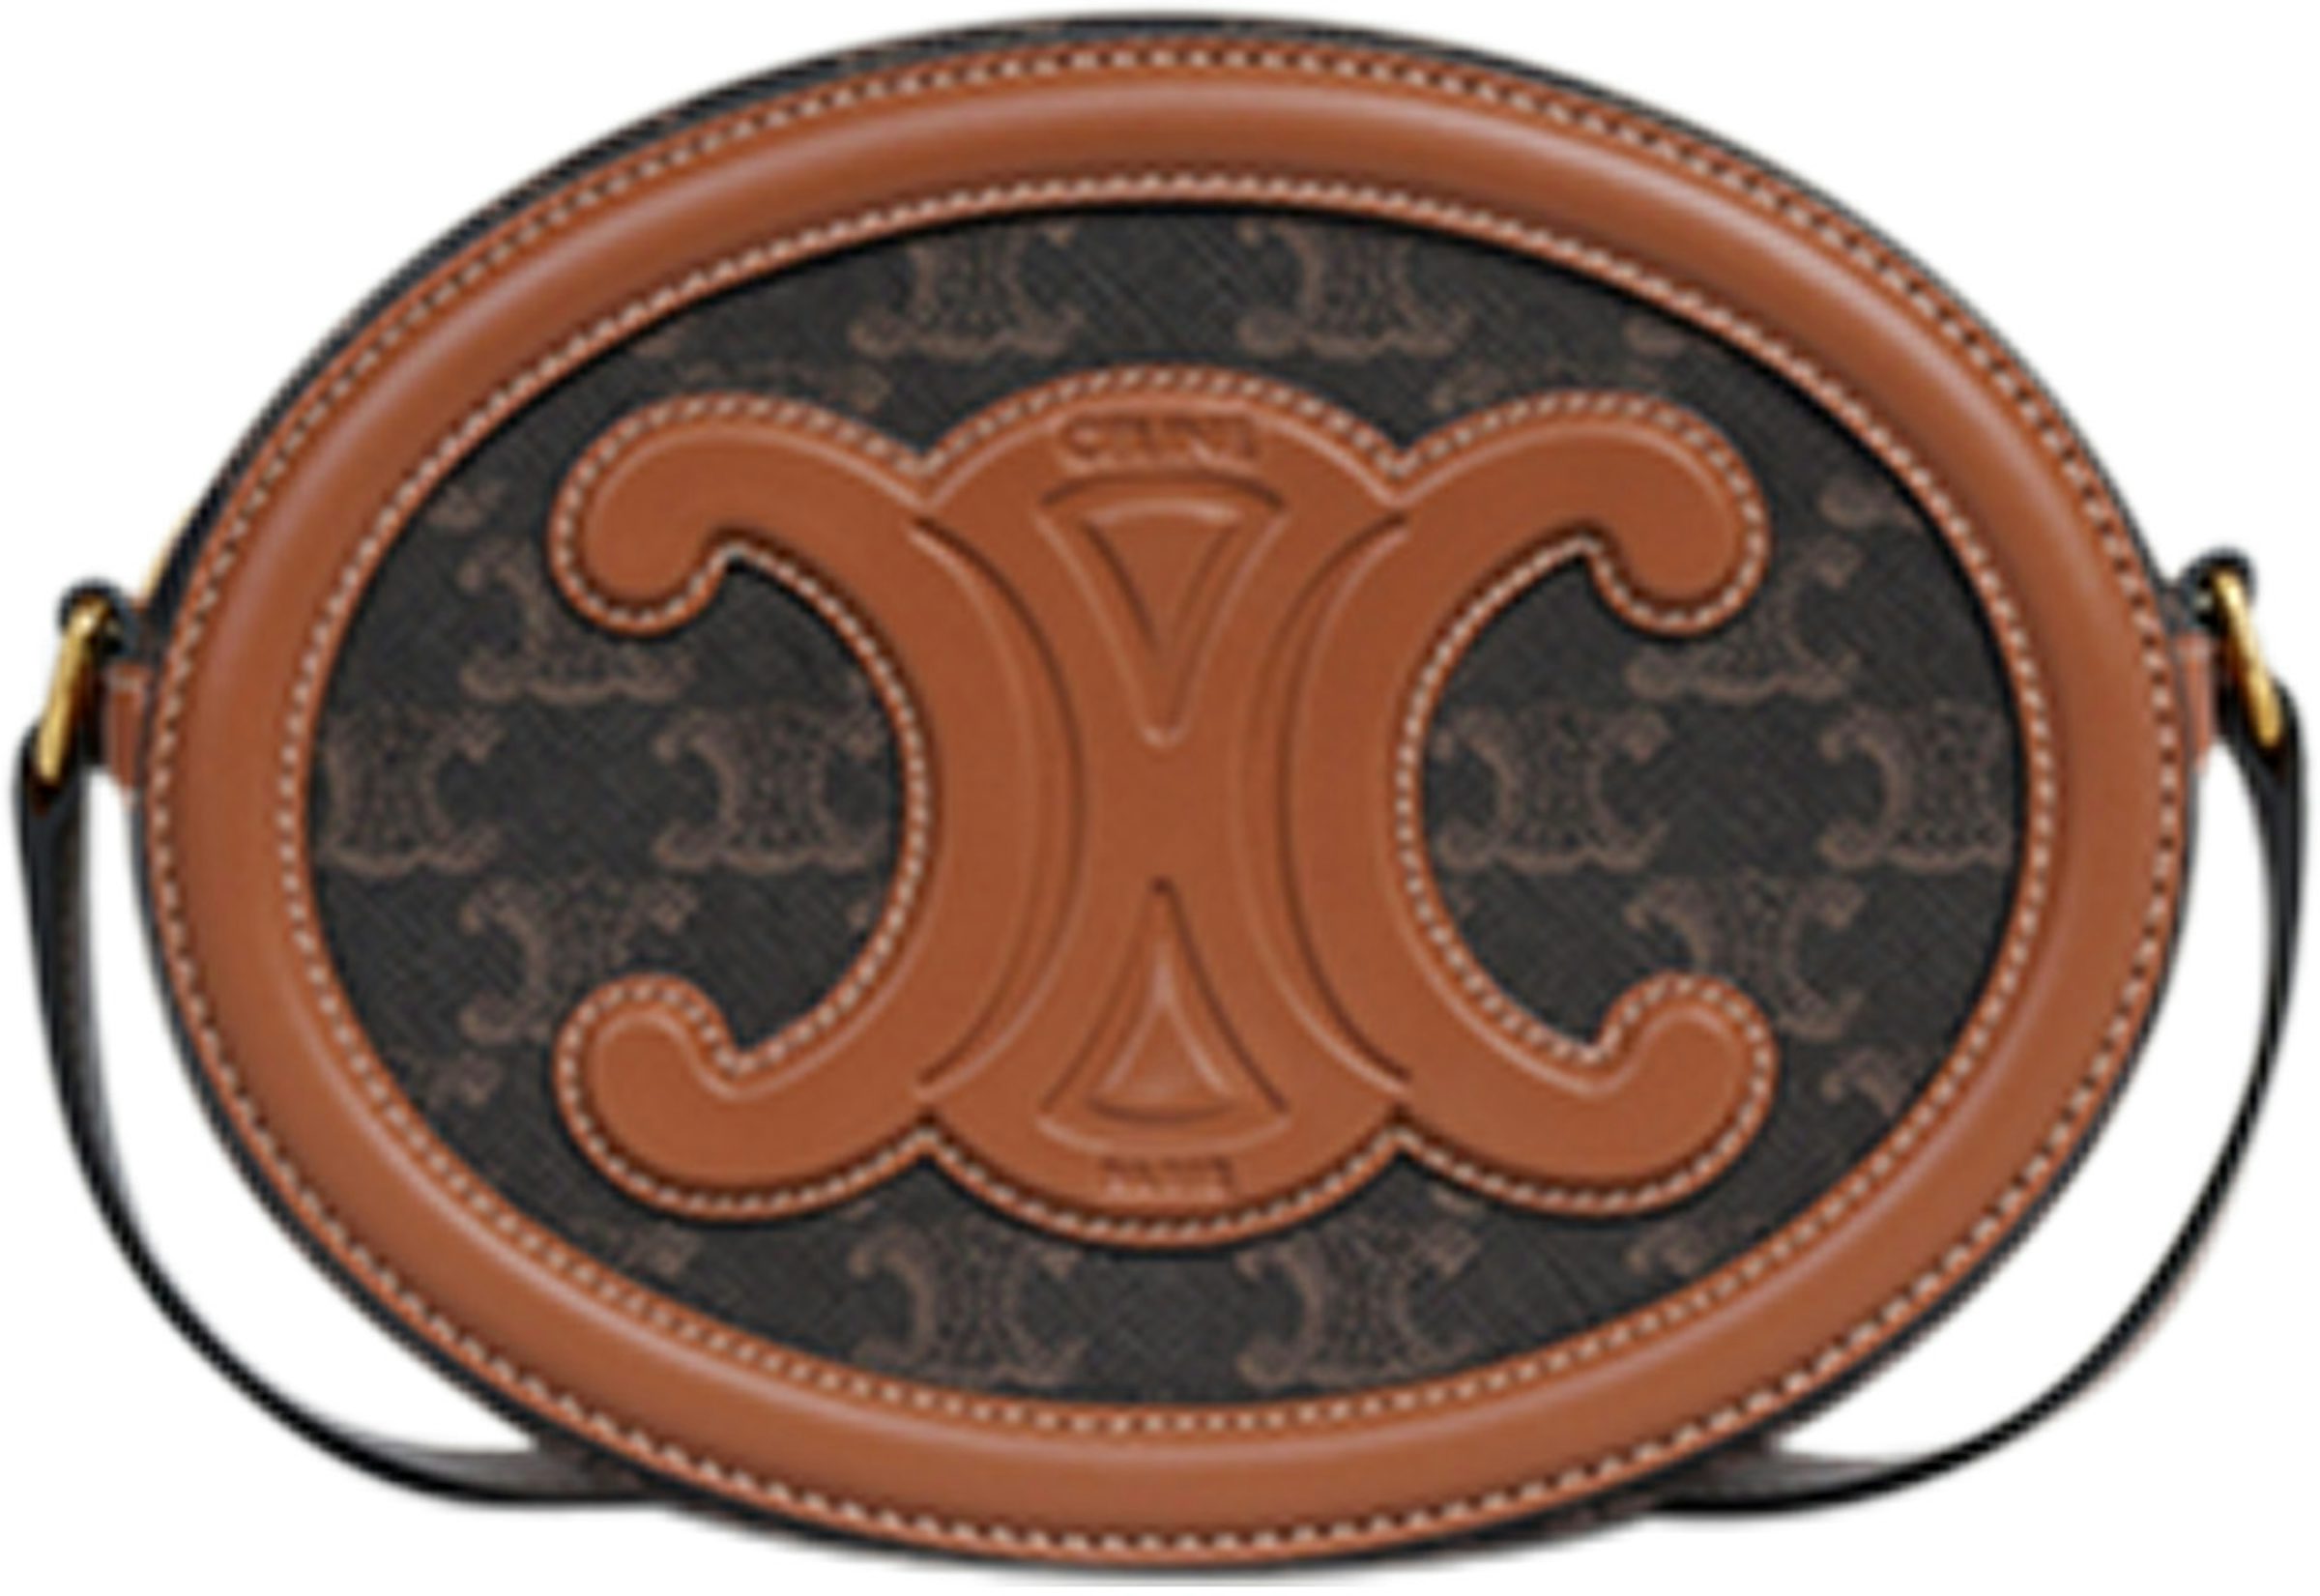 OVAL BAG CUIR TRIOMPHE IN TRIOMPHE CANVAS AND CALFSKIN - TAN